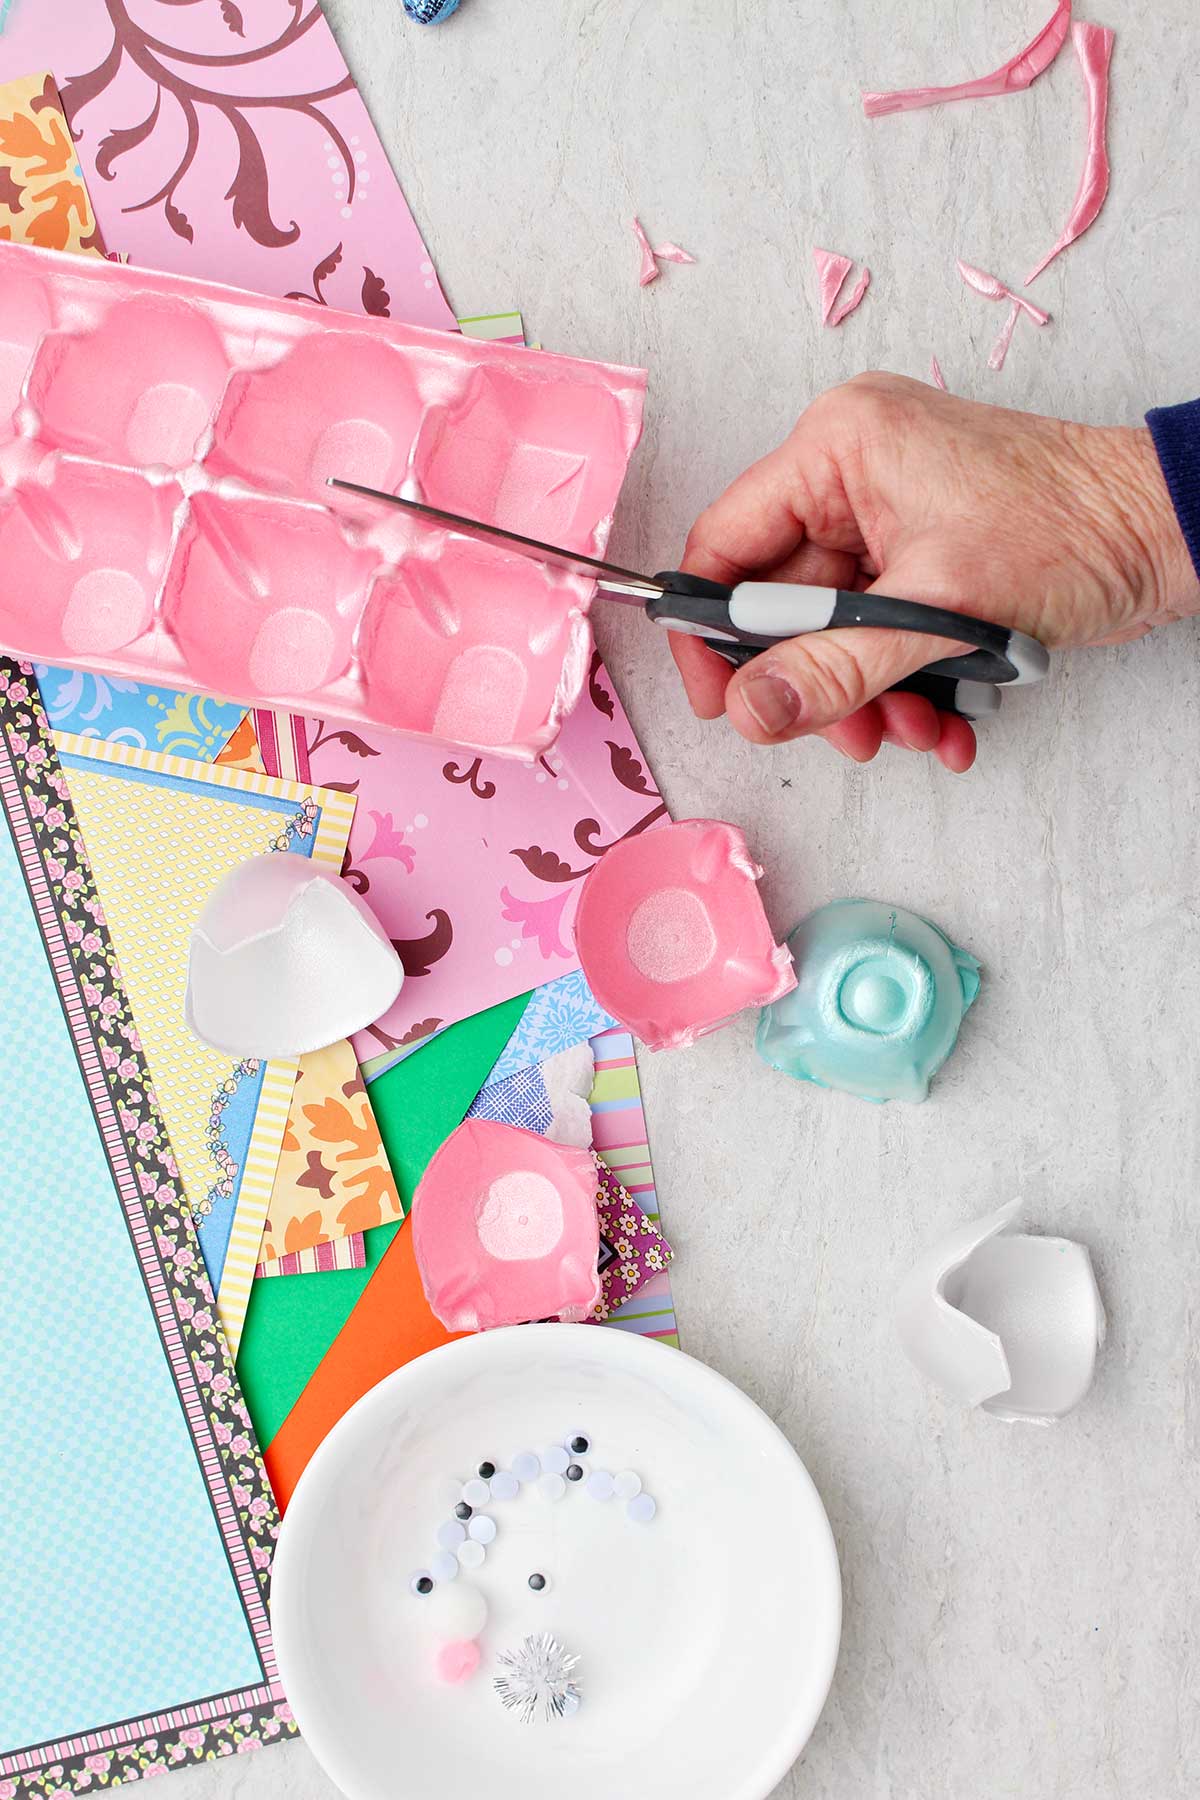 Hand cutting up a pink styrofoam egg carton with scraps of colorful paper in the background.